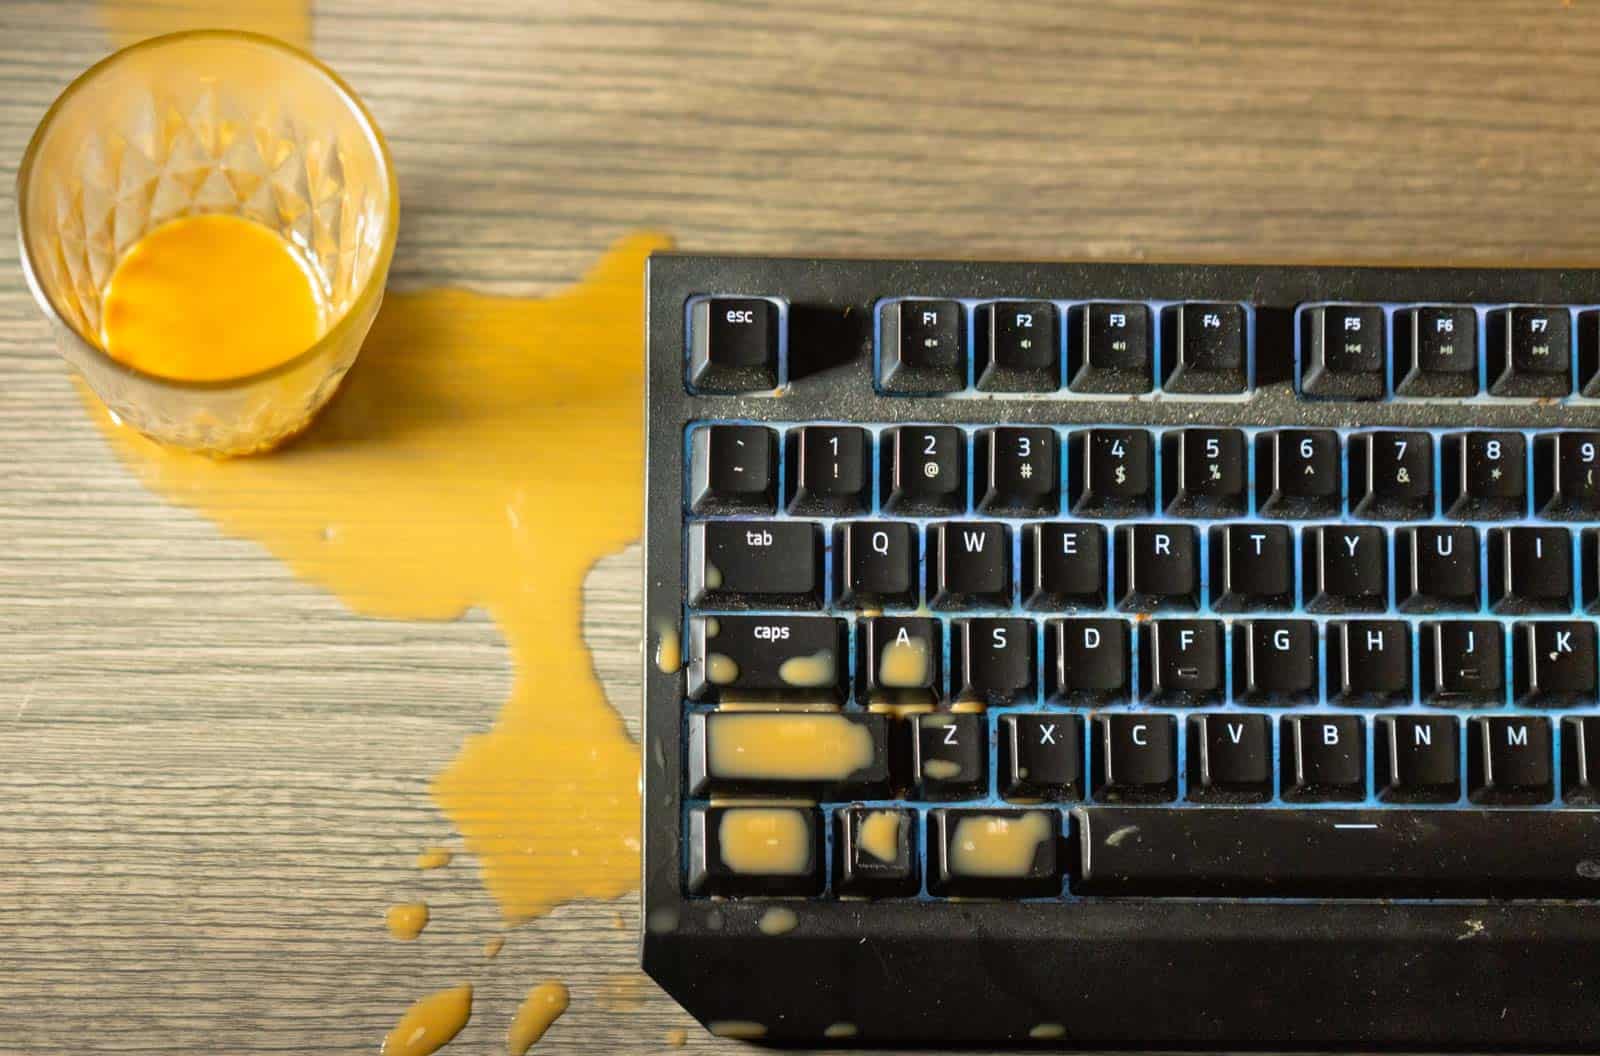 You Can Break Your Mechanical Keyboard By Spilling Something On It